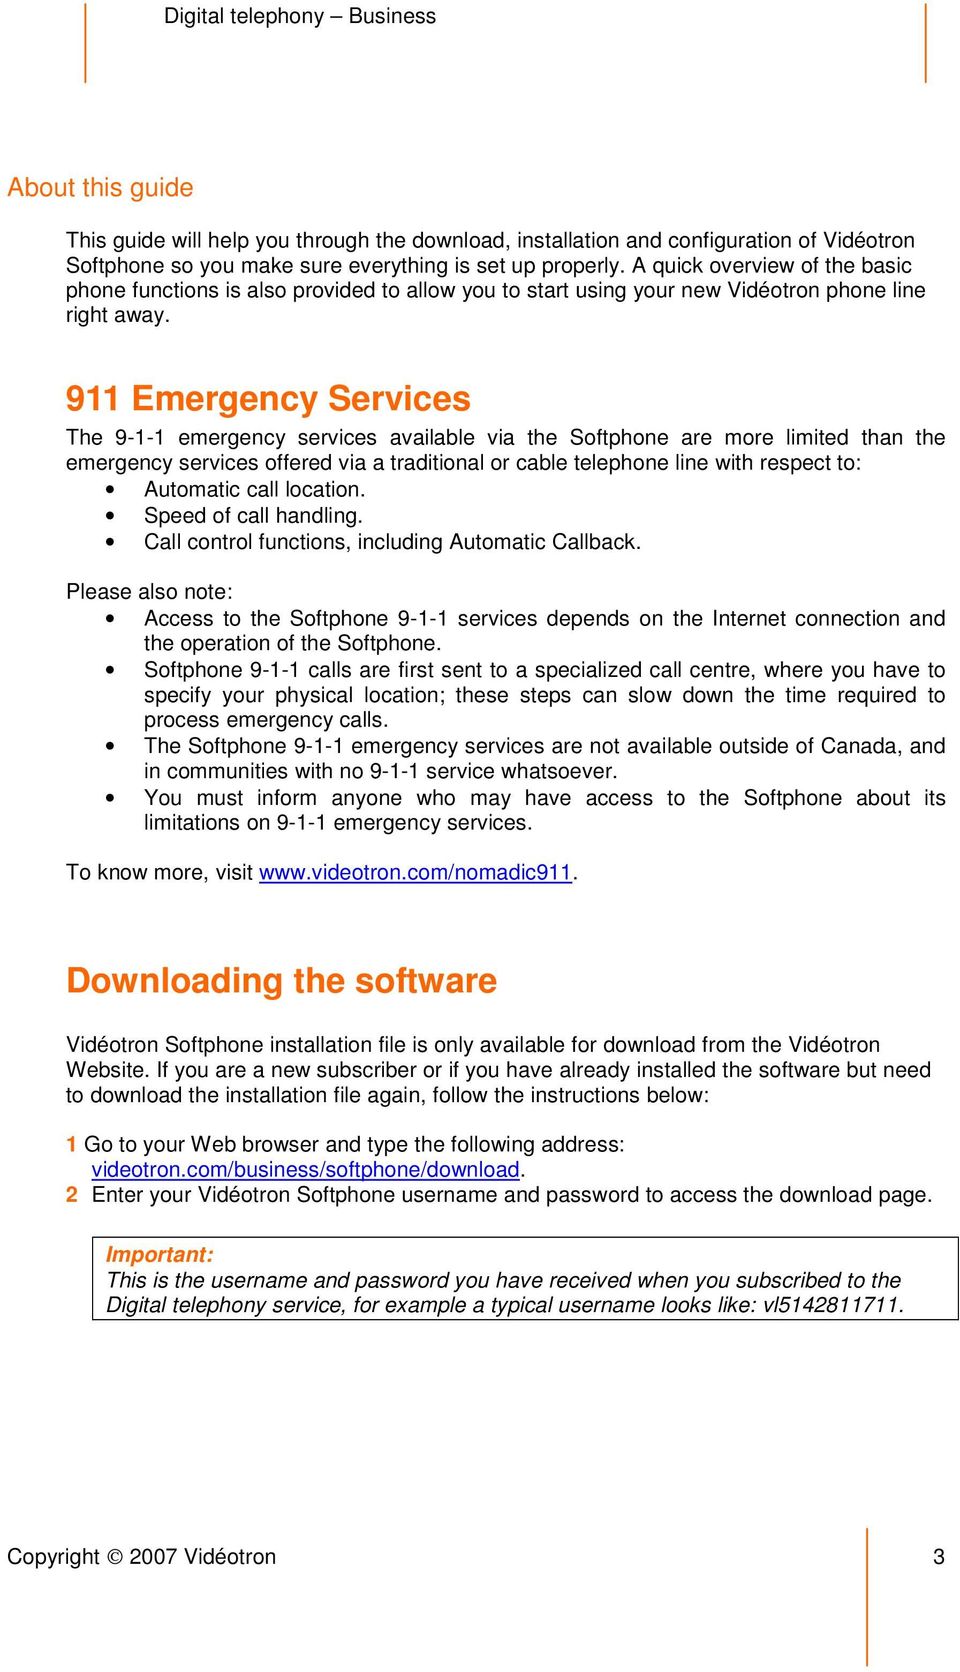 911 Emergency Services The 9-1-1 emergency services available via the Softphone are more limited than the emergency services offered via a traditional or cable telephone line with respect to: